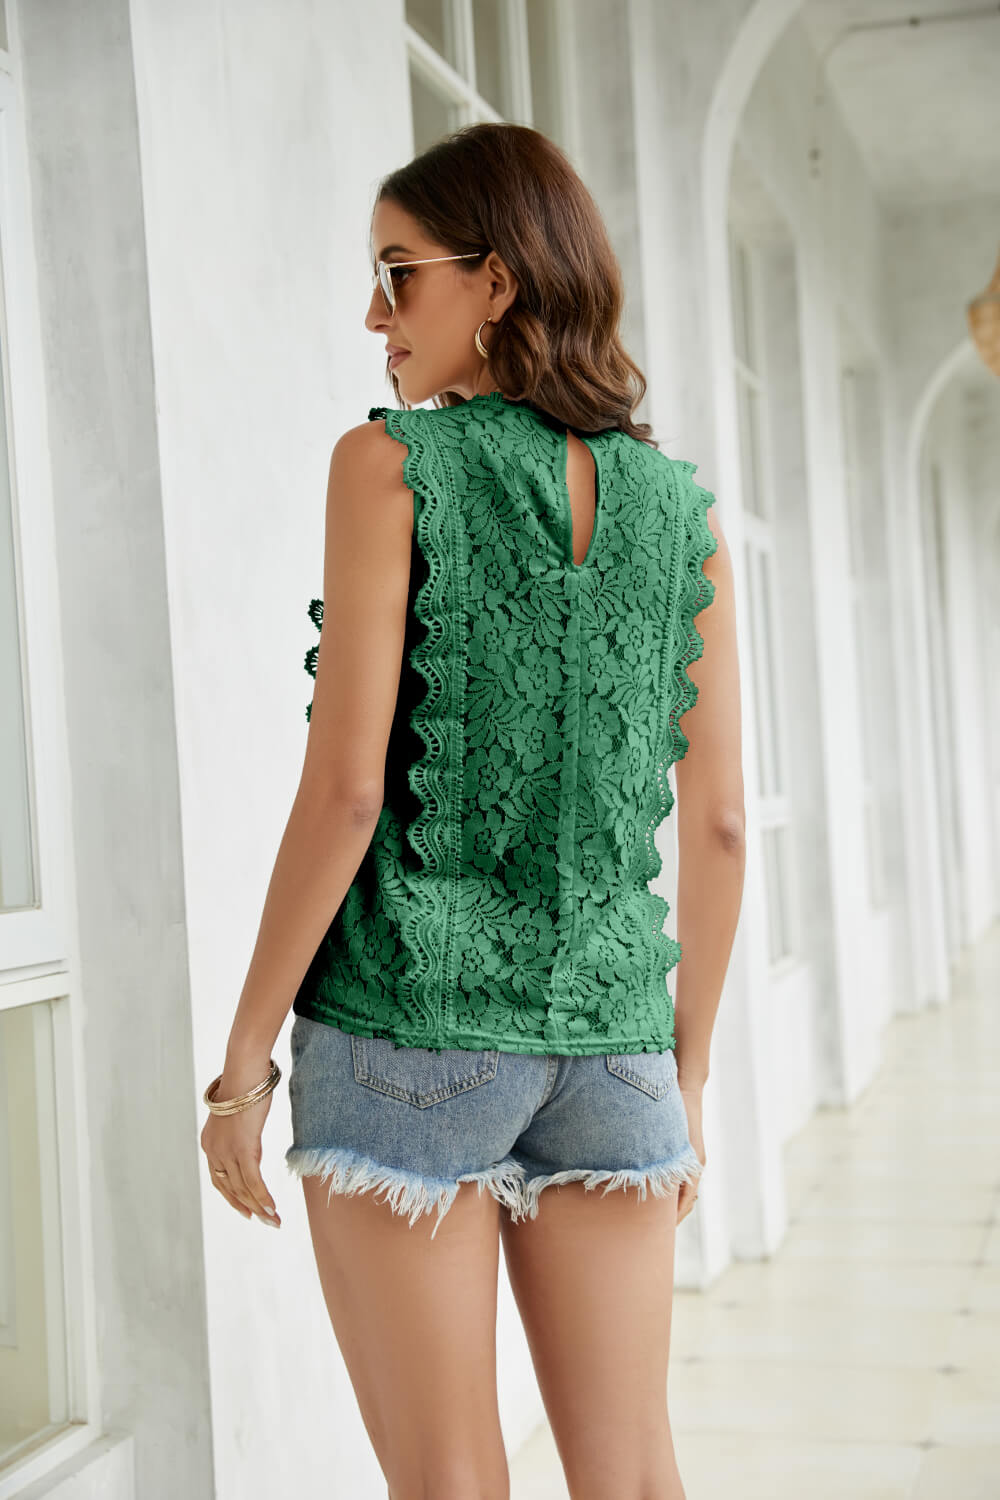 Lace Scalloped Keyhole V-Neck Tank - Bakers Shoes store